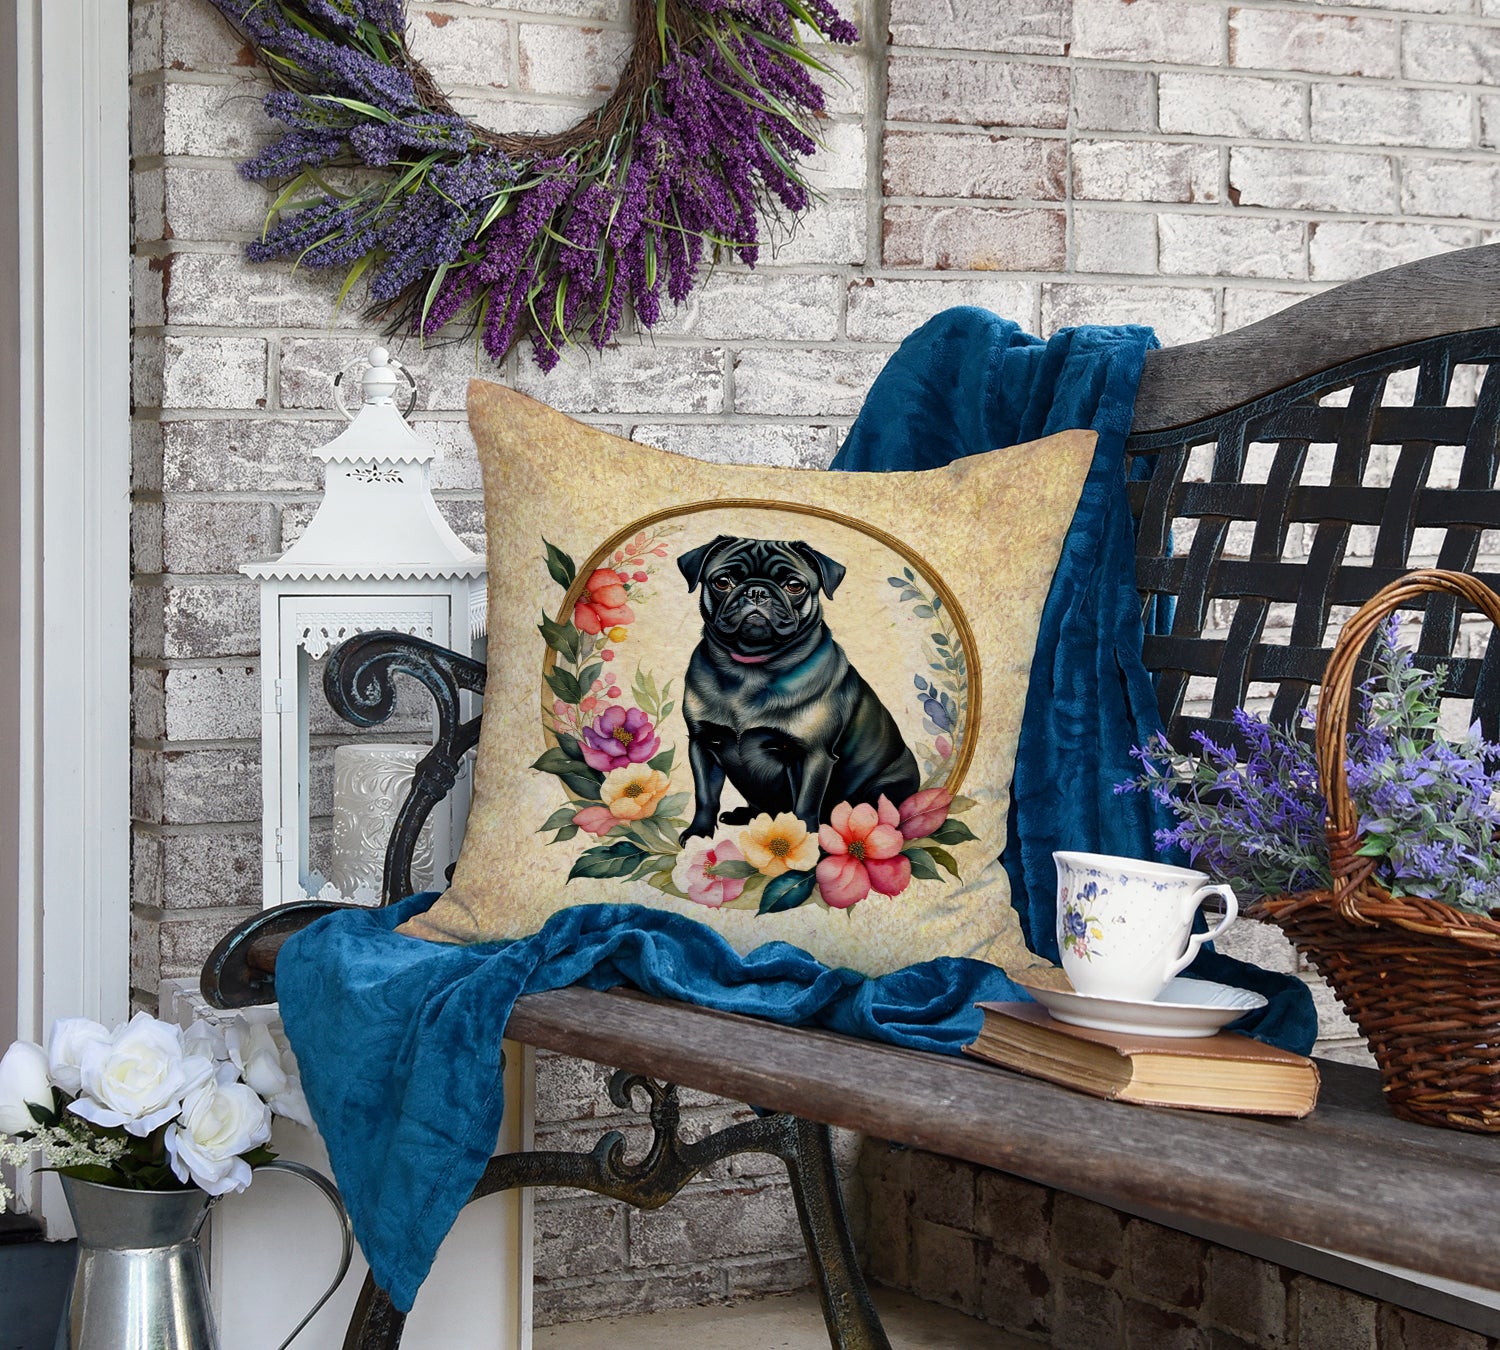 Black Pug and Flowers Fabric Decorative Pillow